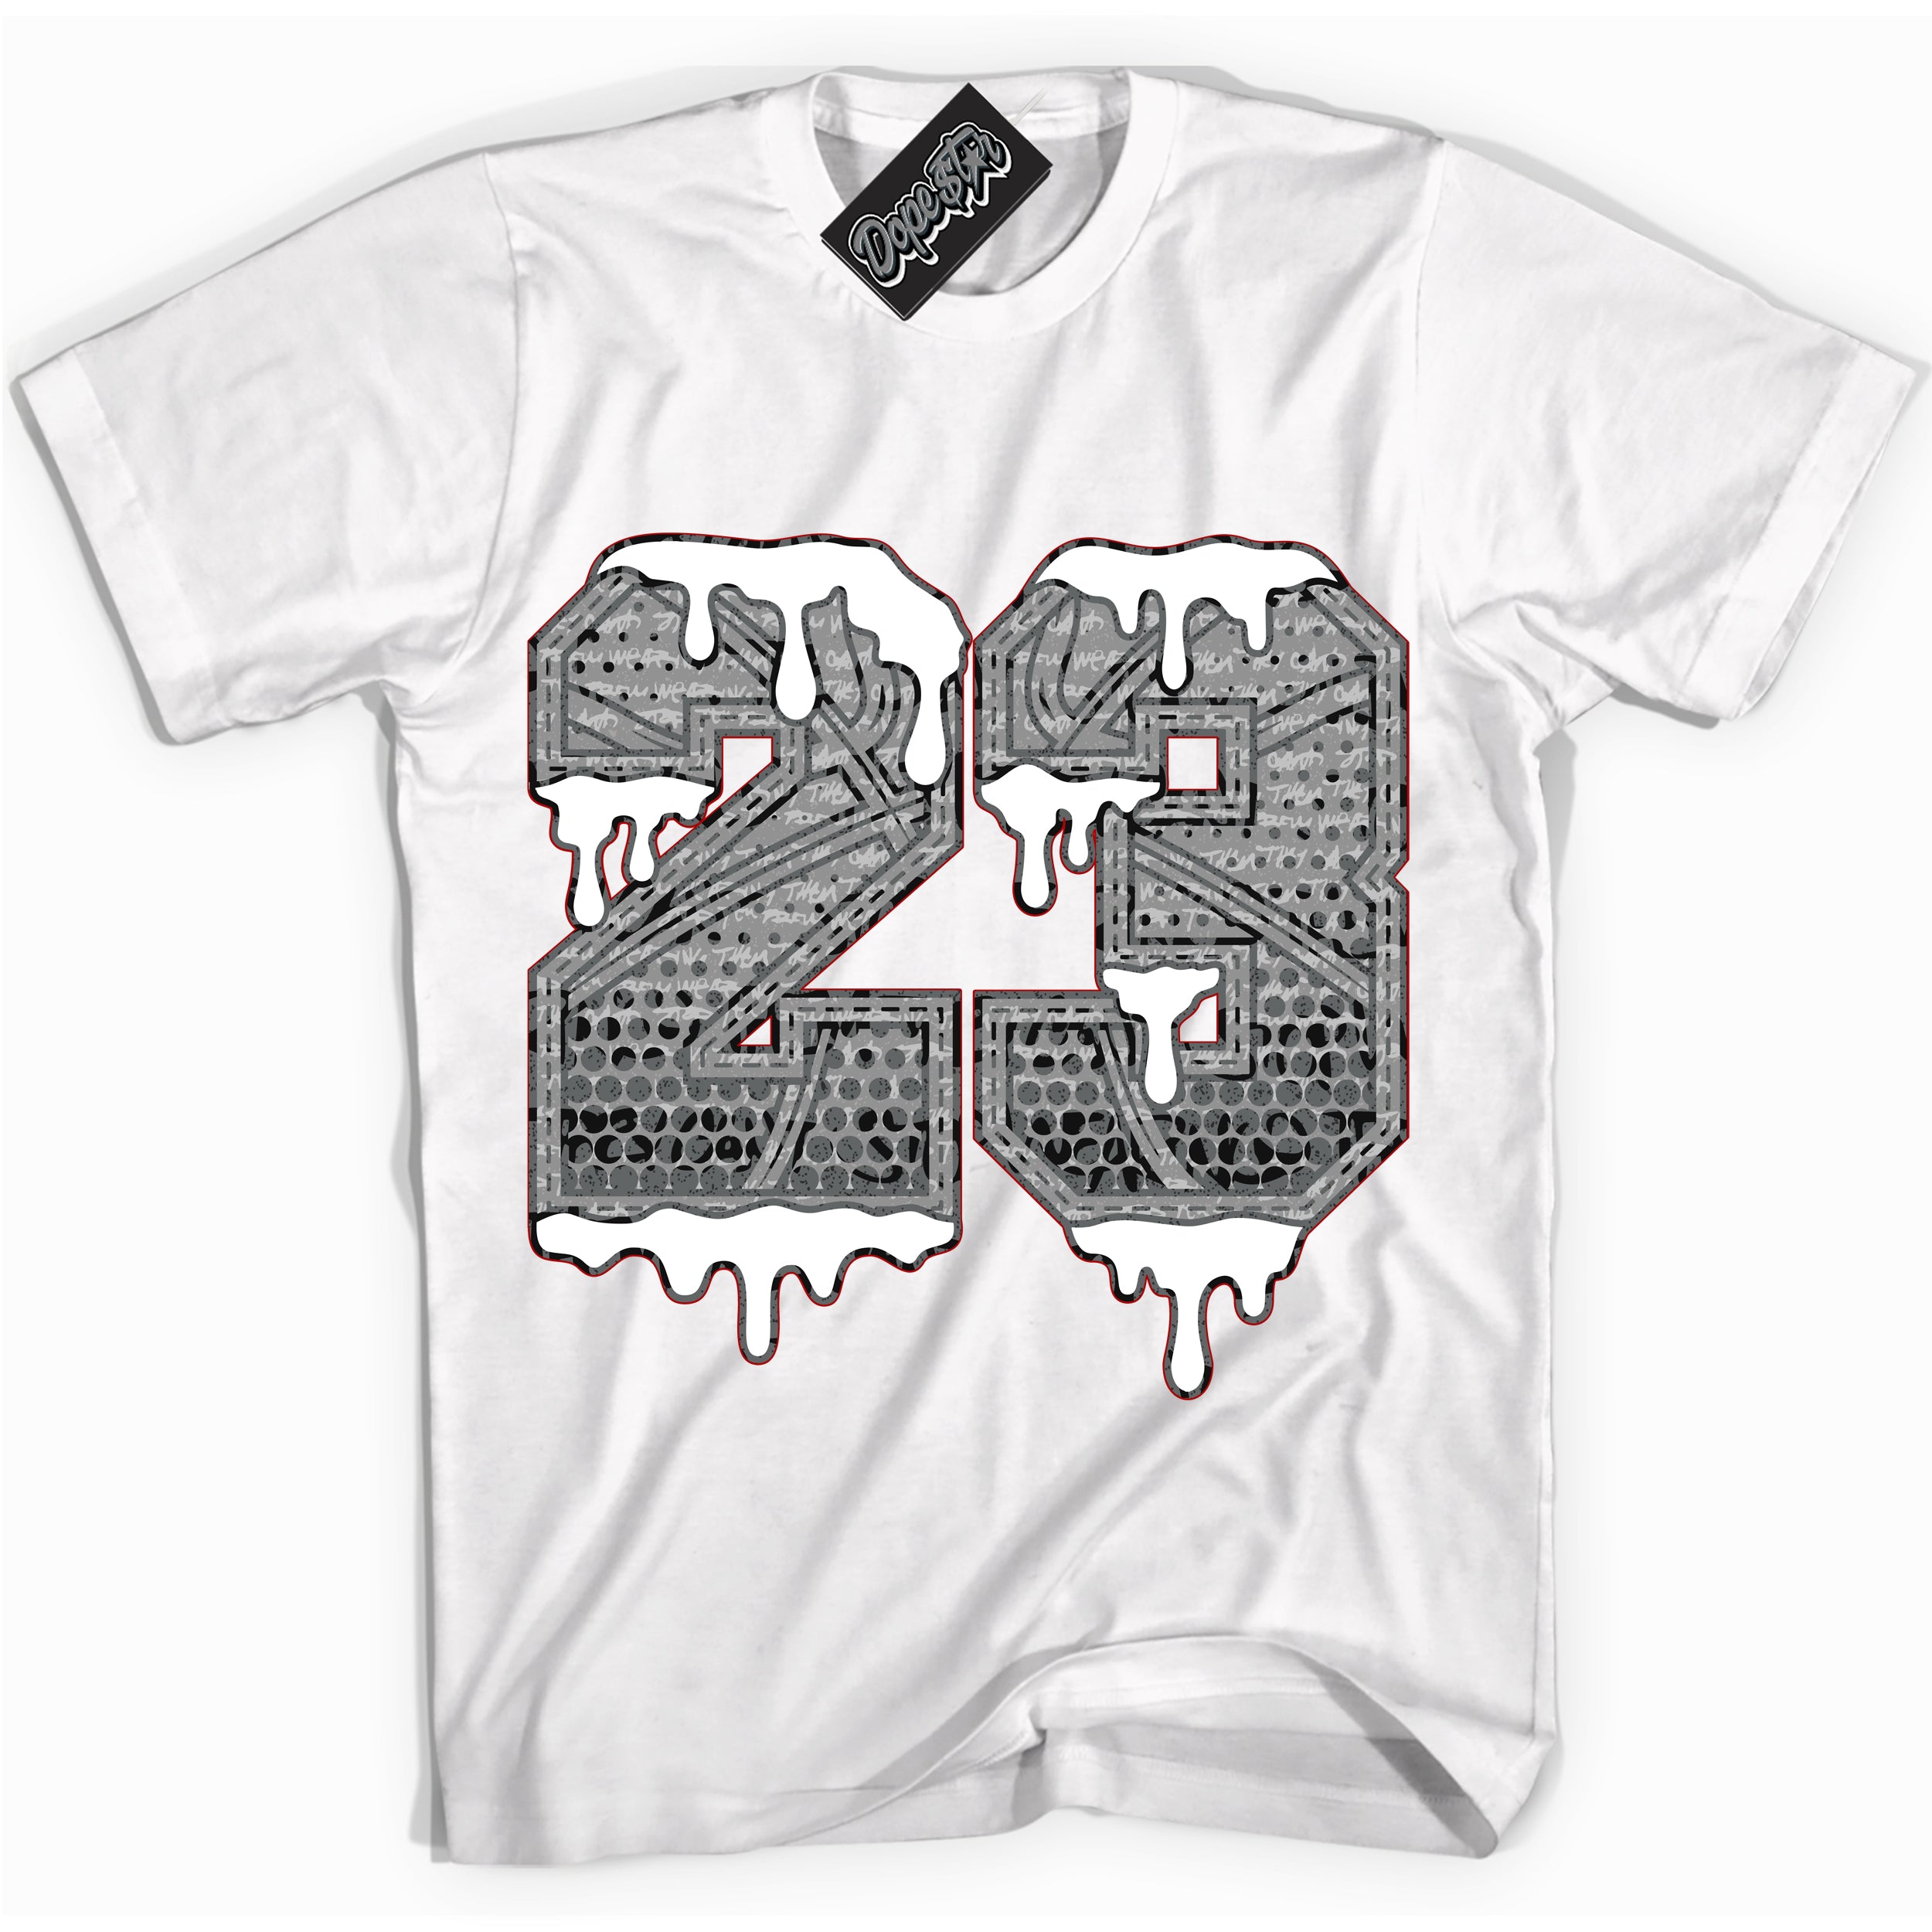 Cool White Shirt with “ 23 Ball ” design that perfectly matches Rebellionaire 1s Sneakers.